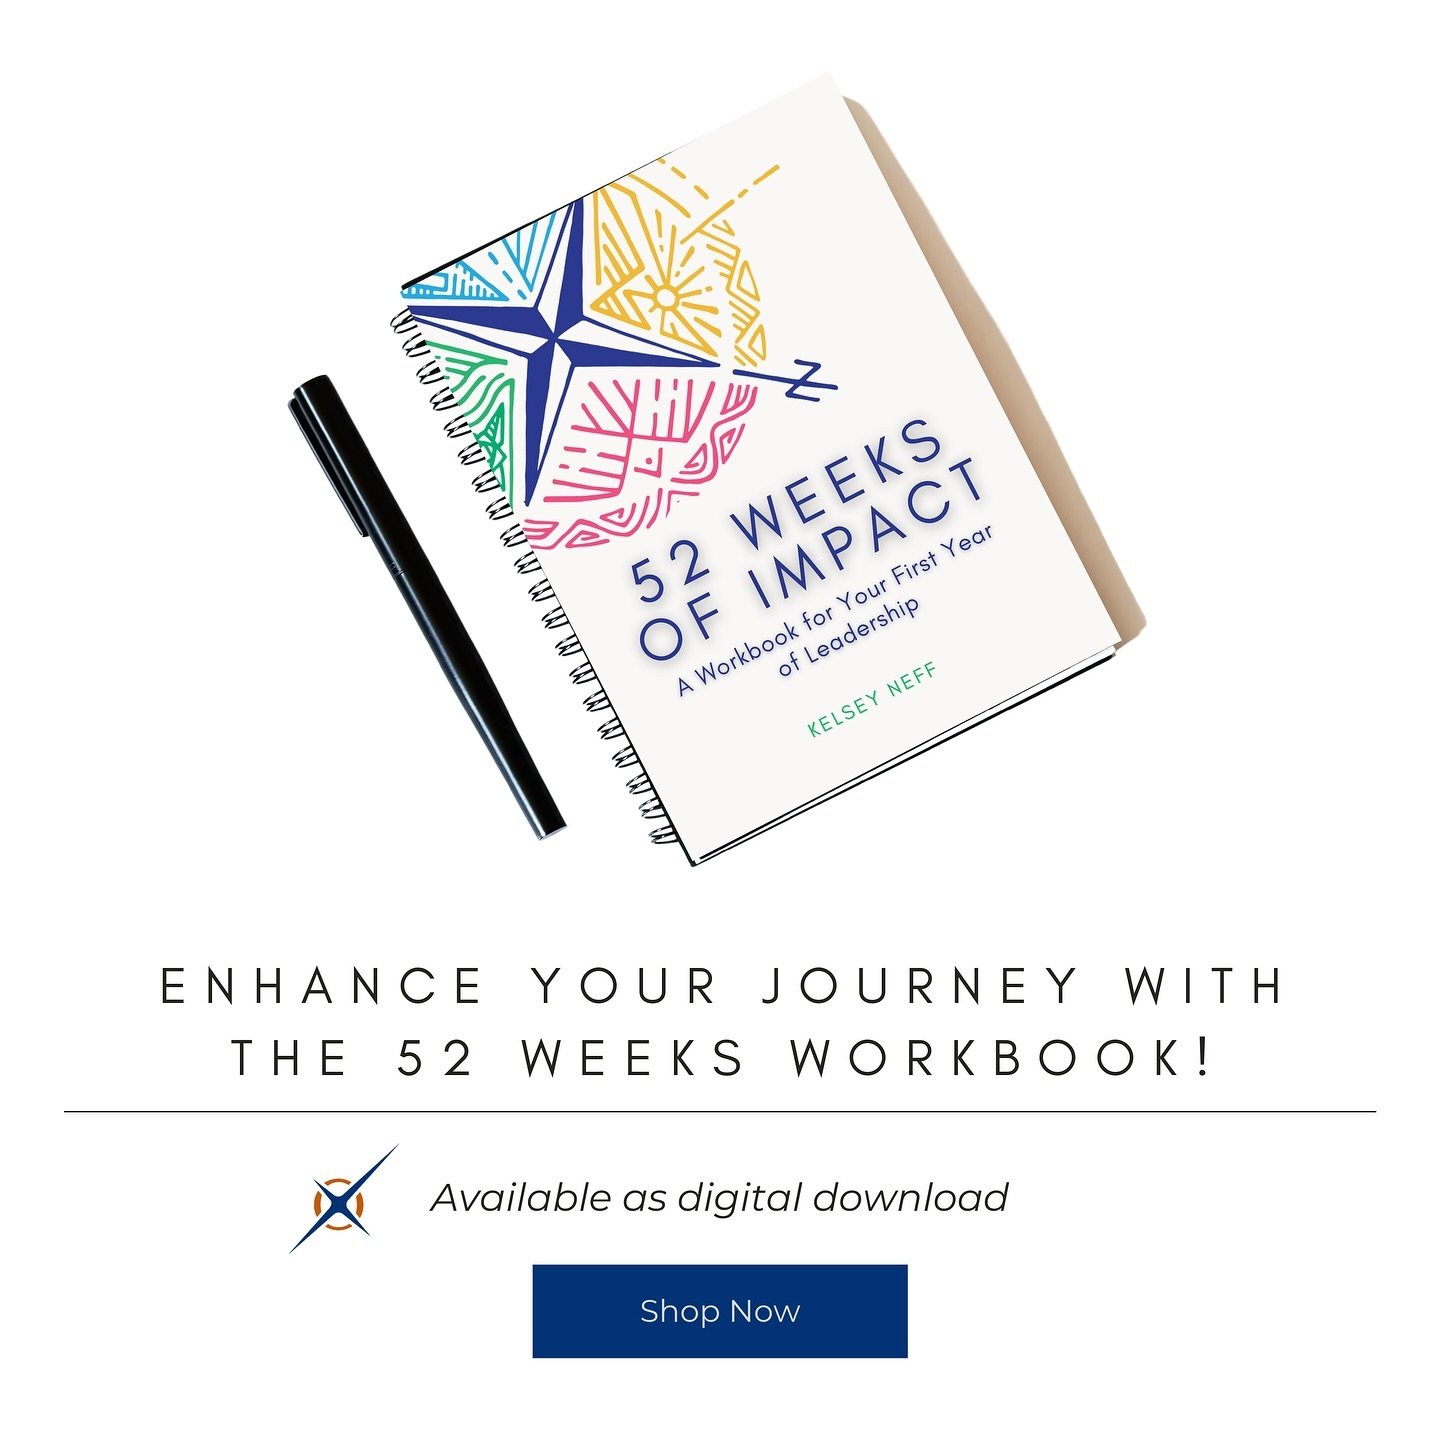 Did you know that there is a workbook you can get to help stay on track of your 52 Weeks journey? Get it at the link in bio!

#52weeksofimpact #newbook #guidedjournal #leadershipresources #leadershipskills #newmanager #companyculture #digitalproduct 